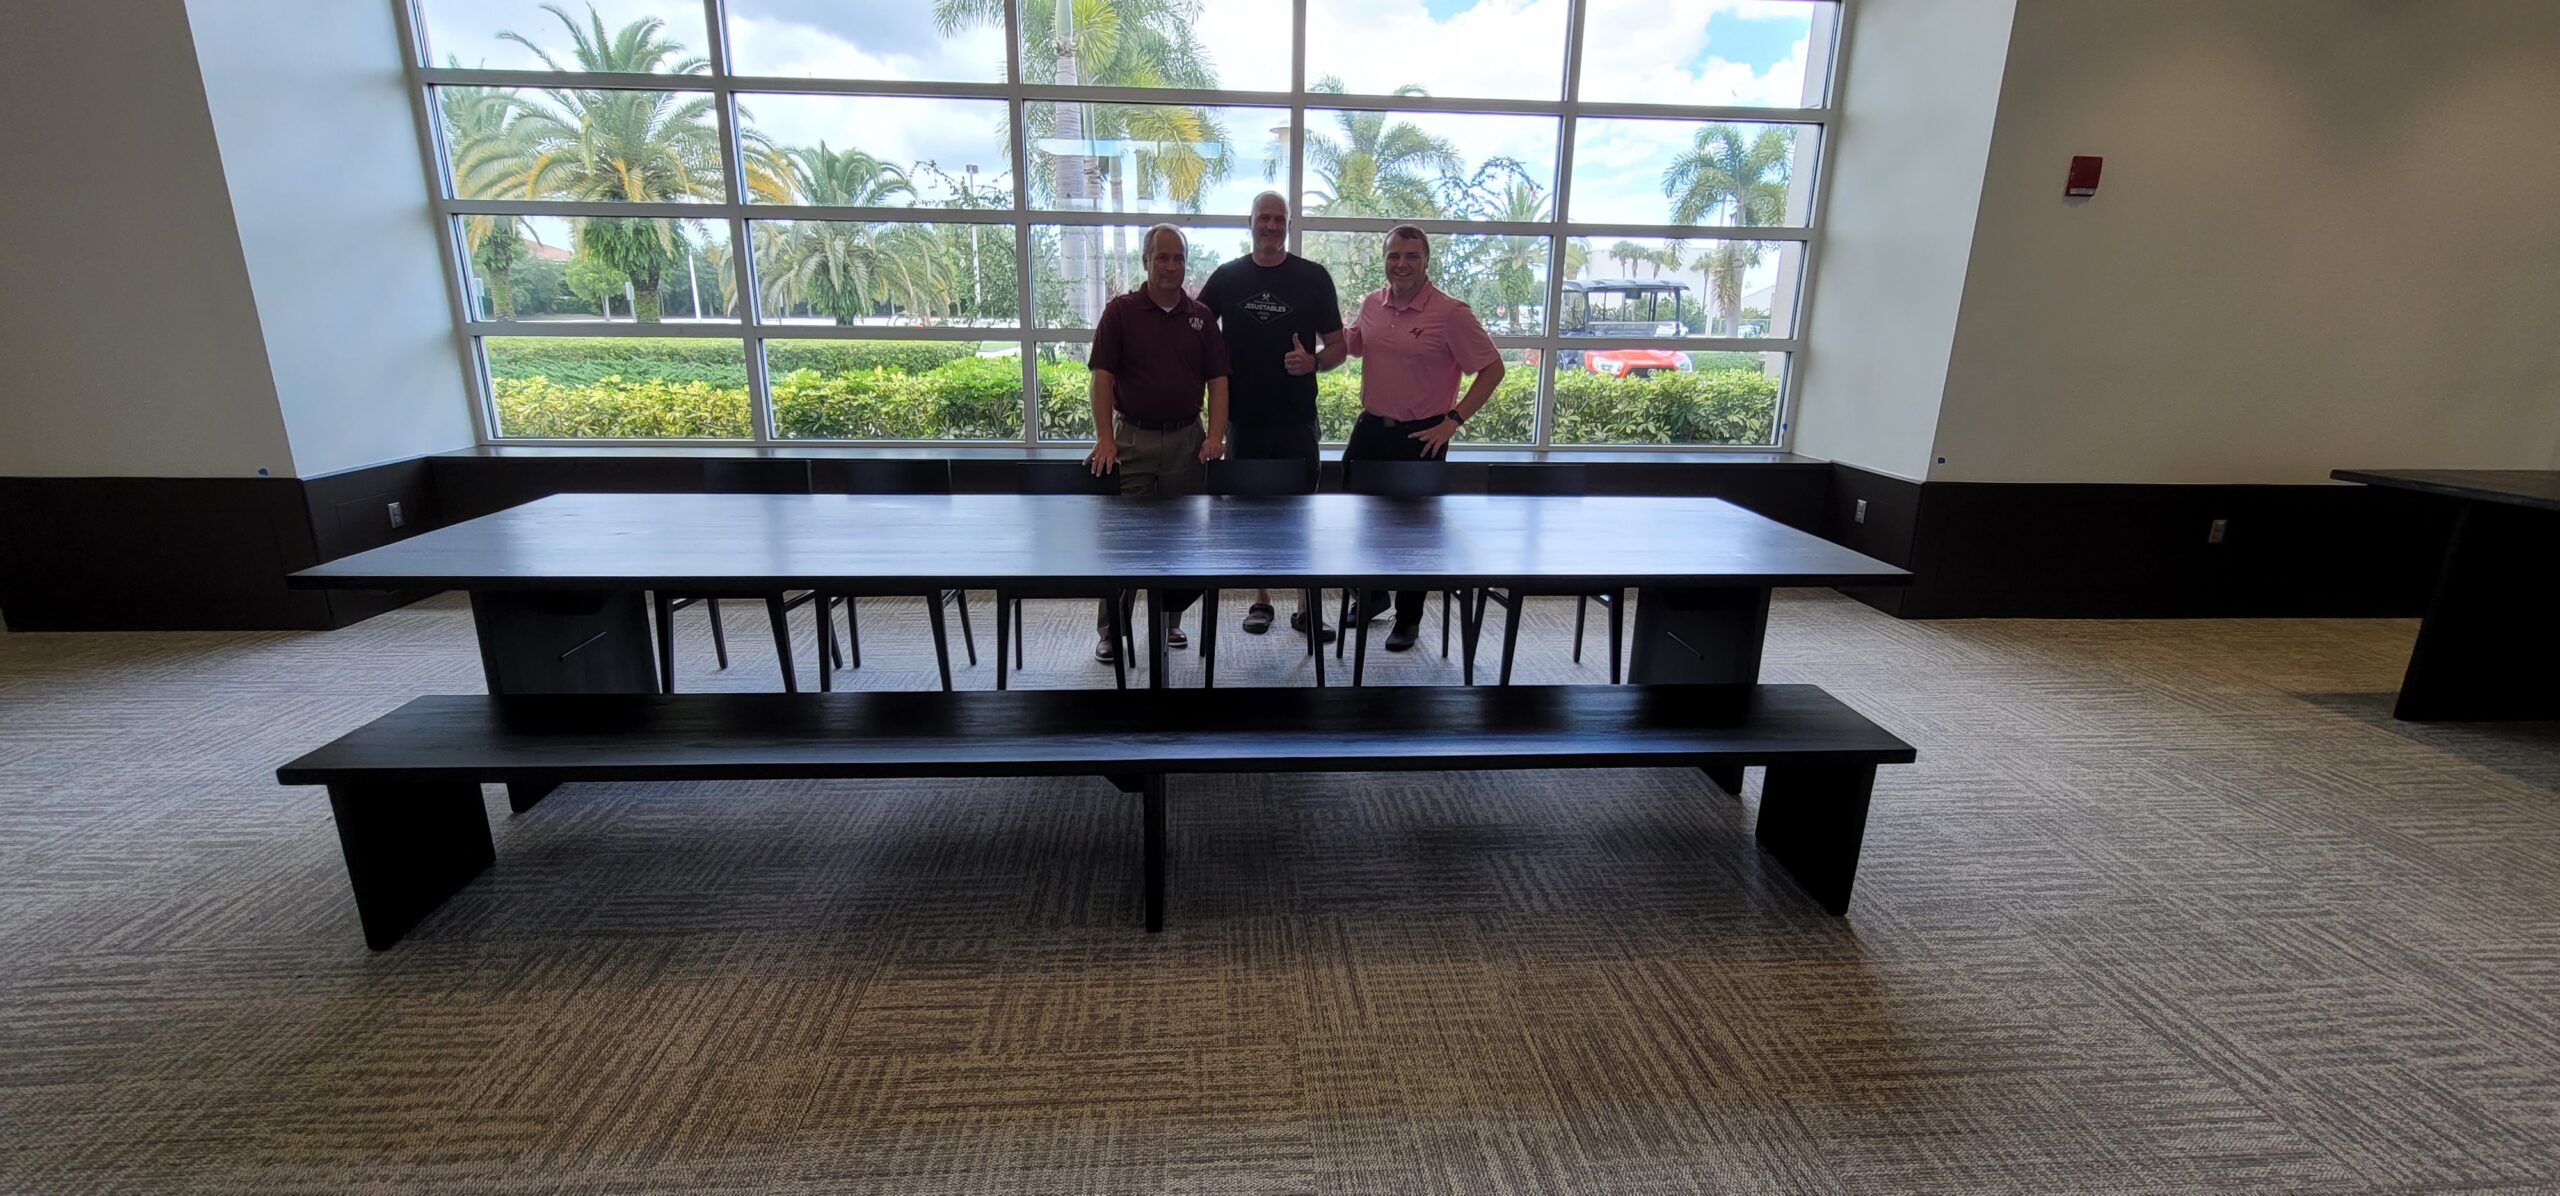 first baptist church of naples gets a jesus table